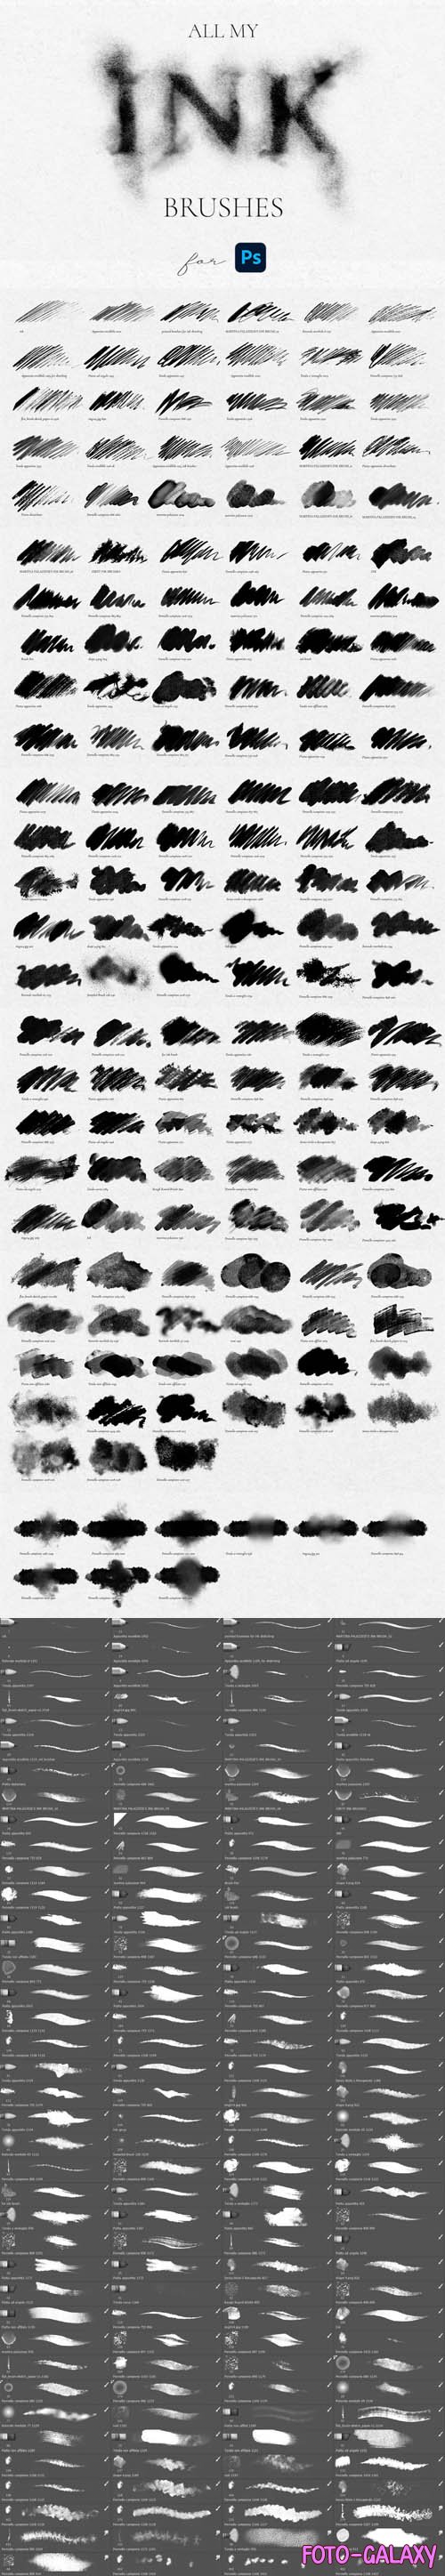 150+ Ink Effect Brushes for Photoshop